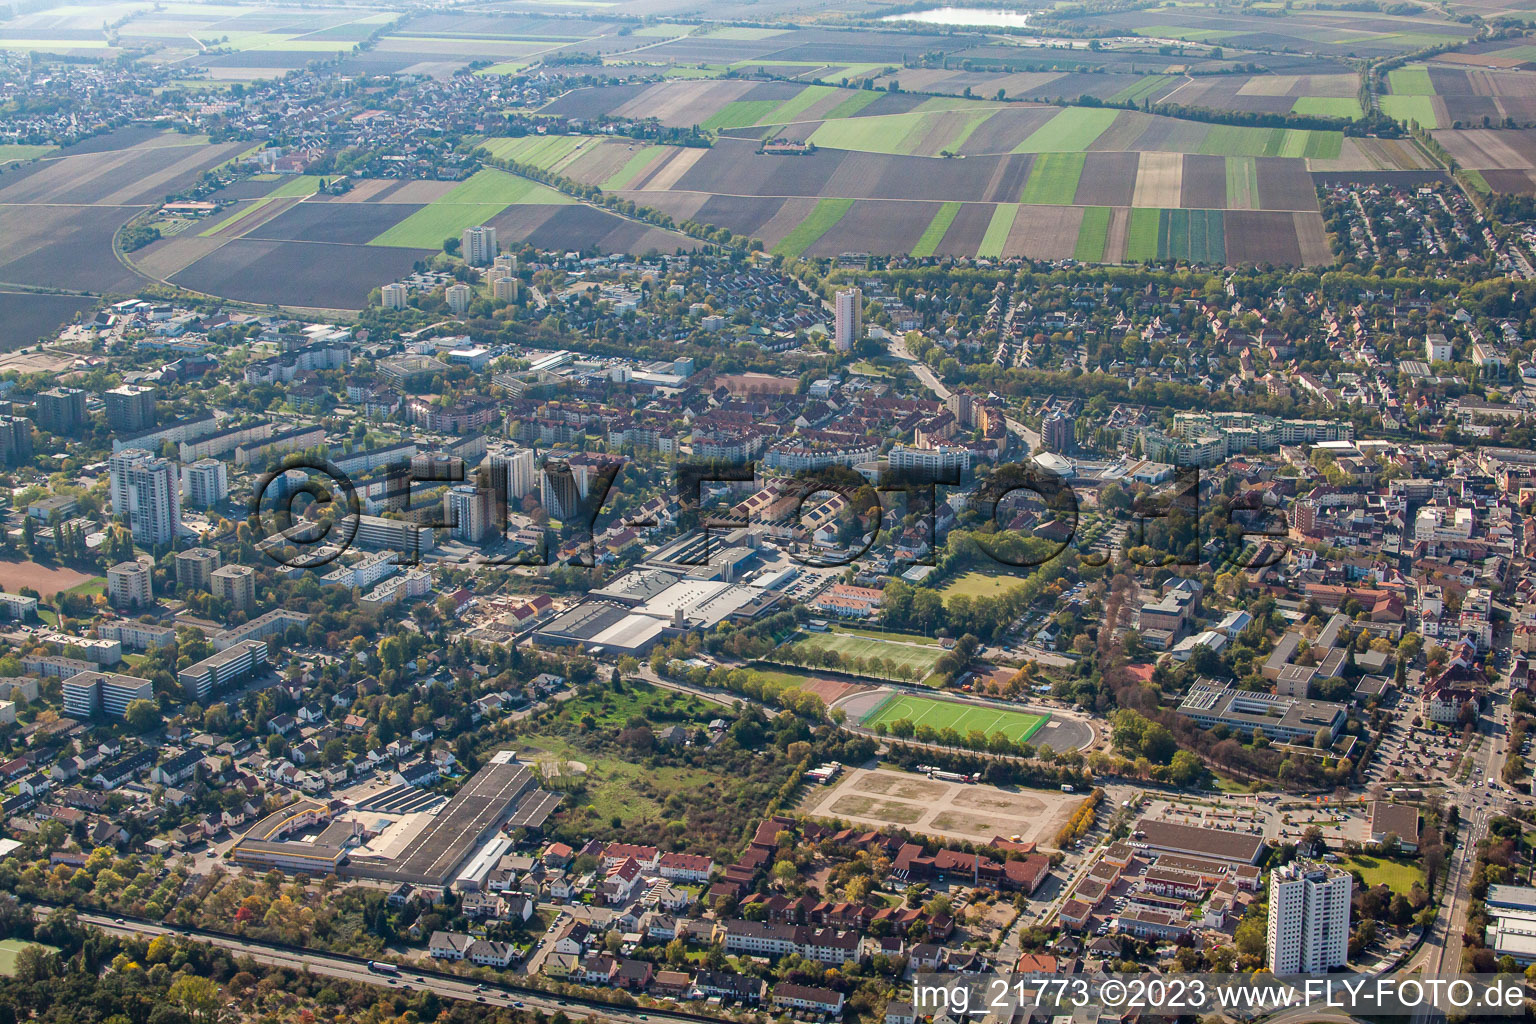 Frankenthal in the state Rhineland-Palatinate, Germany viewn from the air